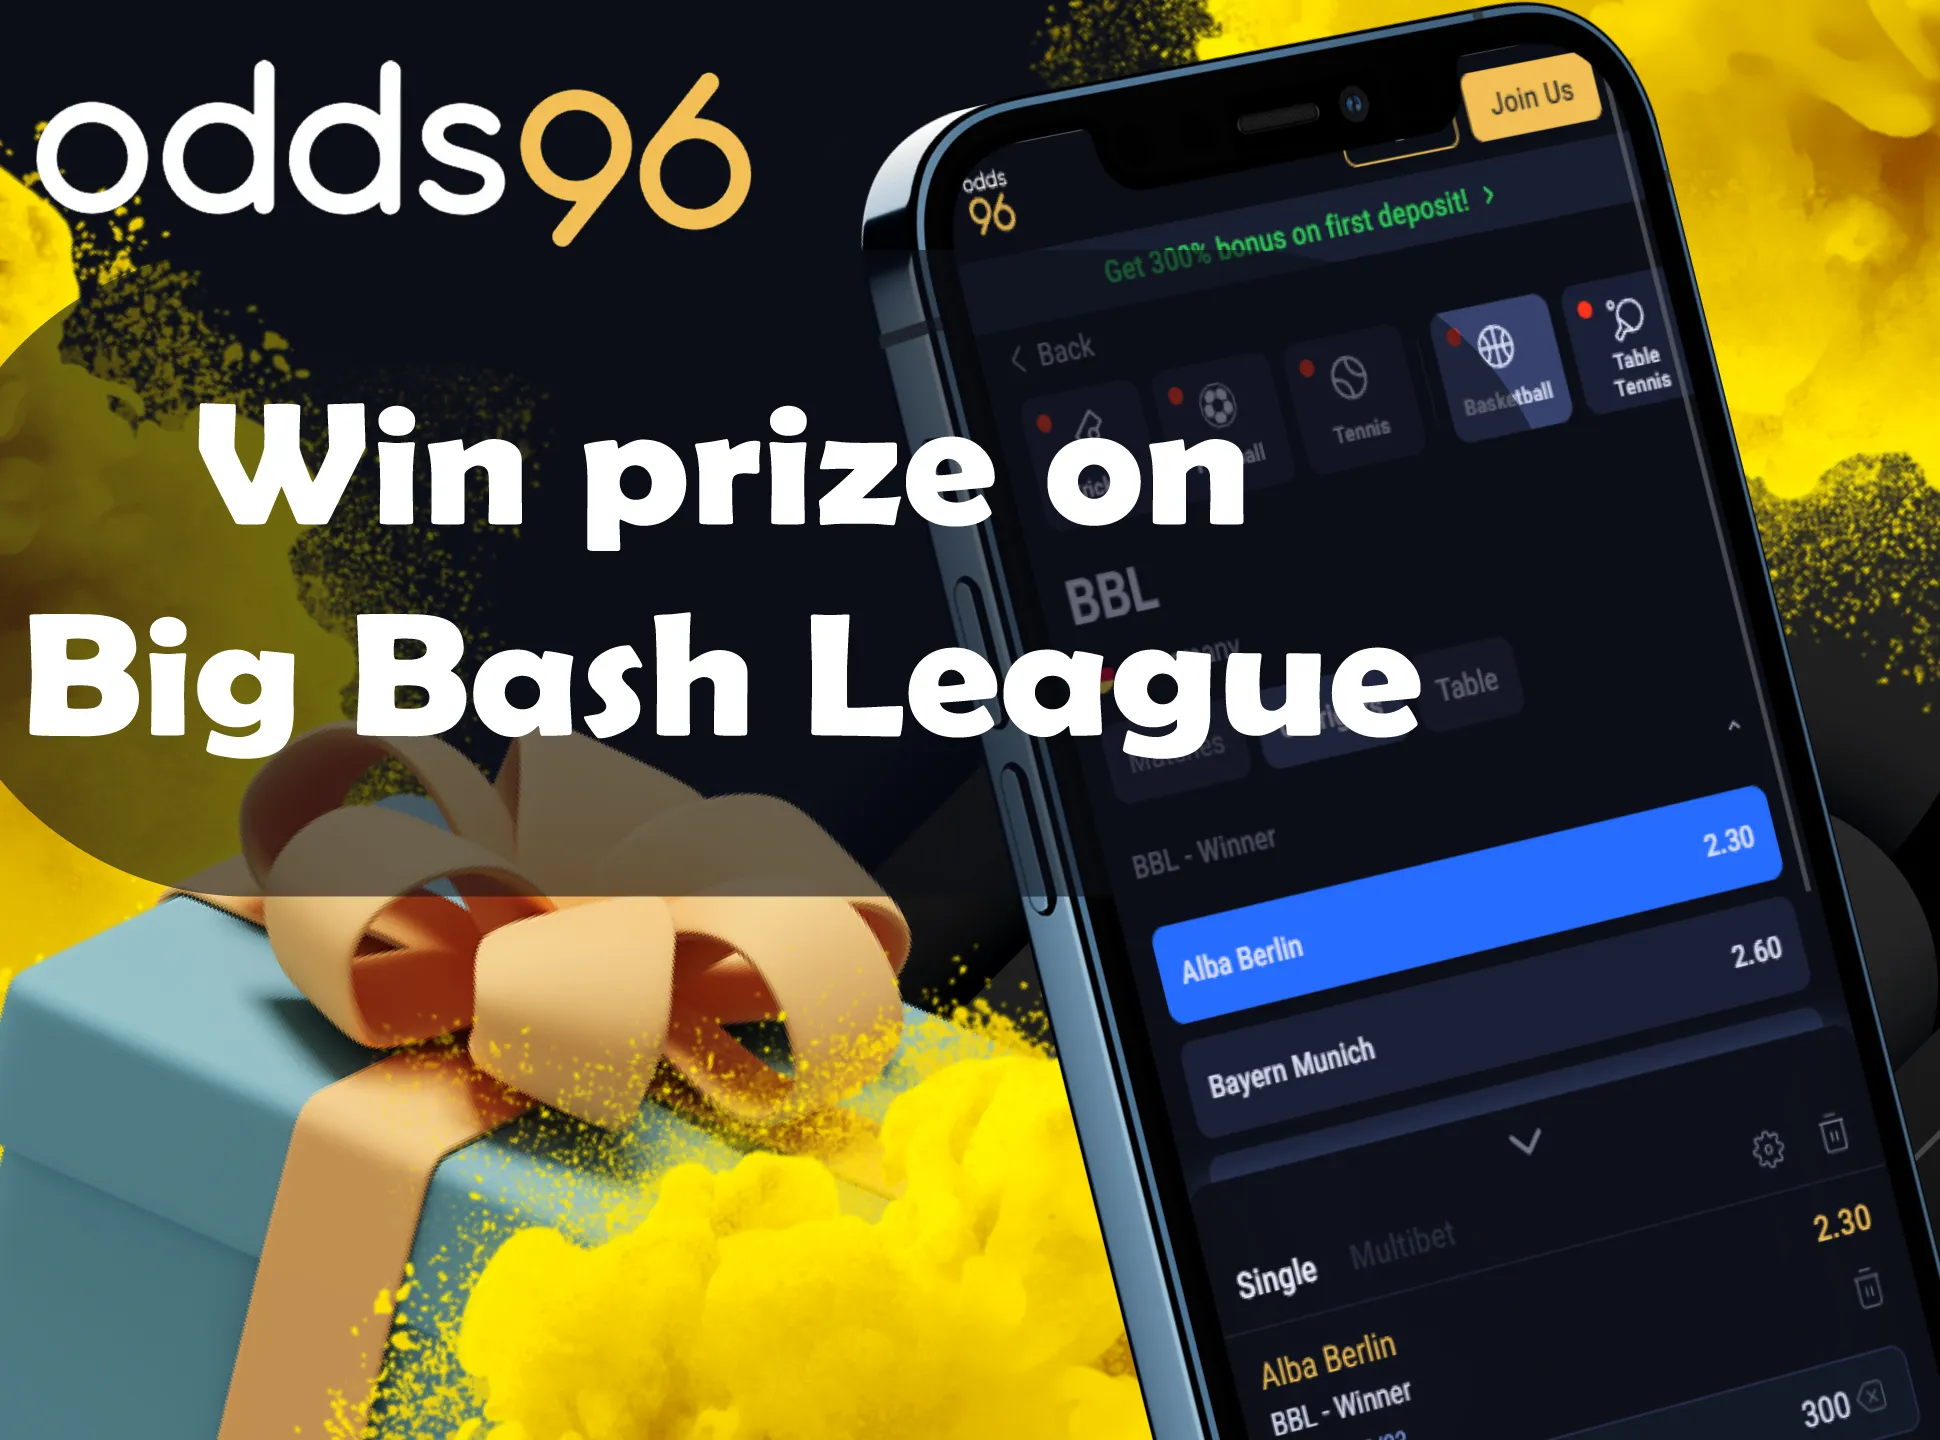 Big Bash League is a great event to make bets on.